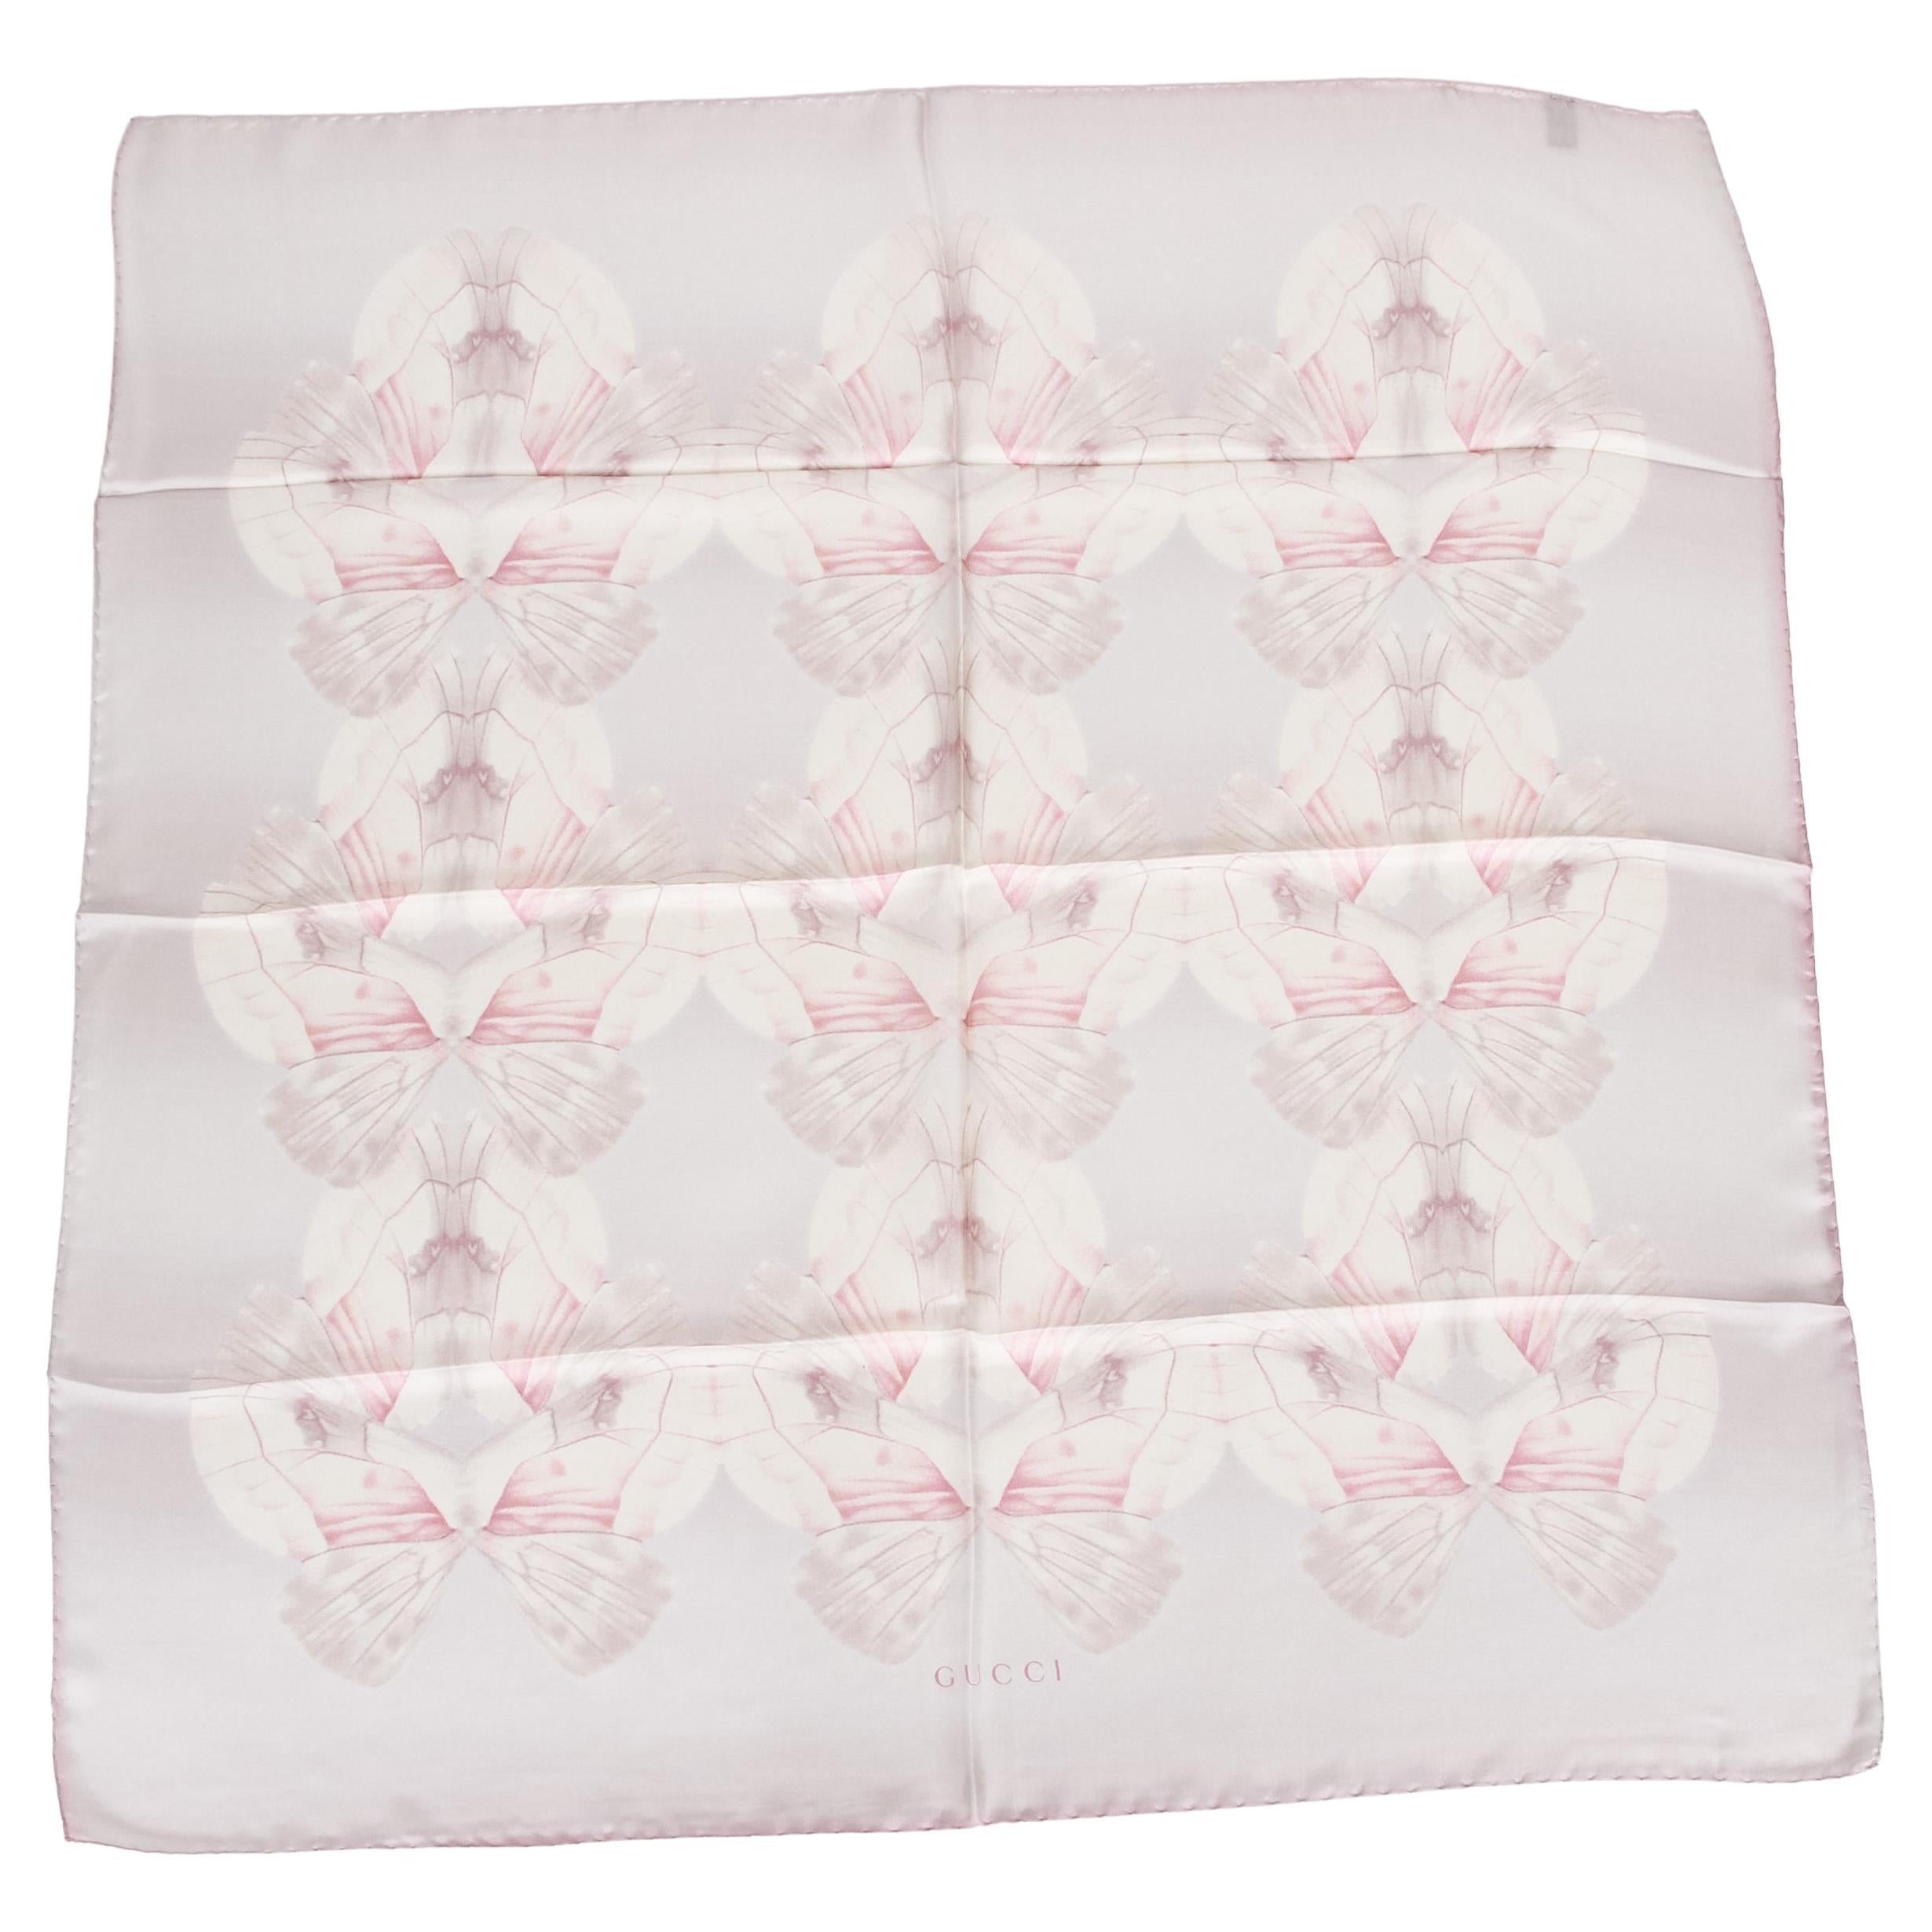 New Gucci Pink Butterflies Silk Scarf For Sale